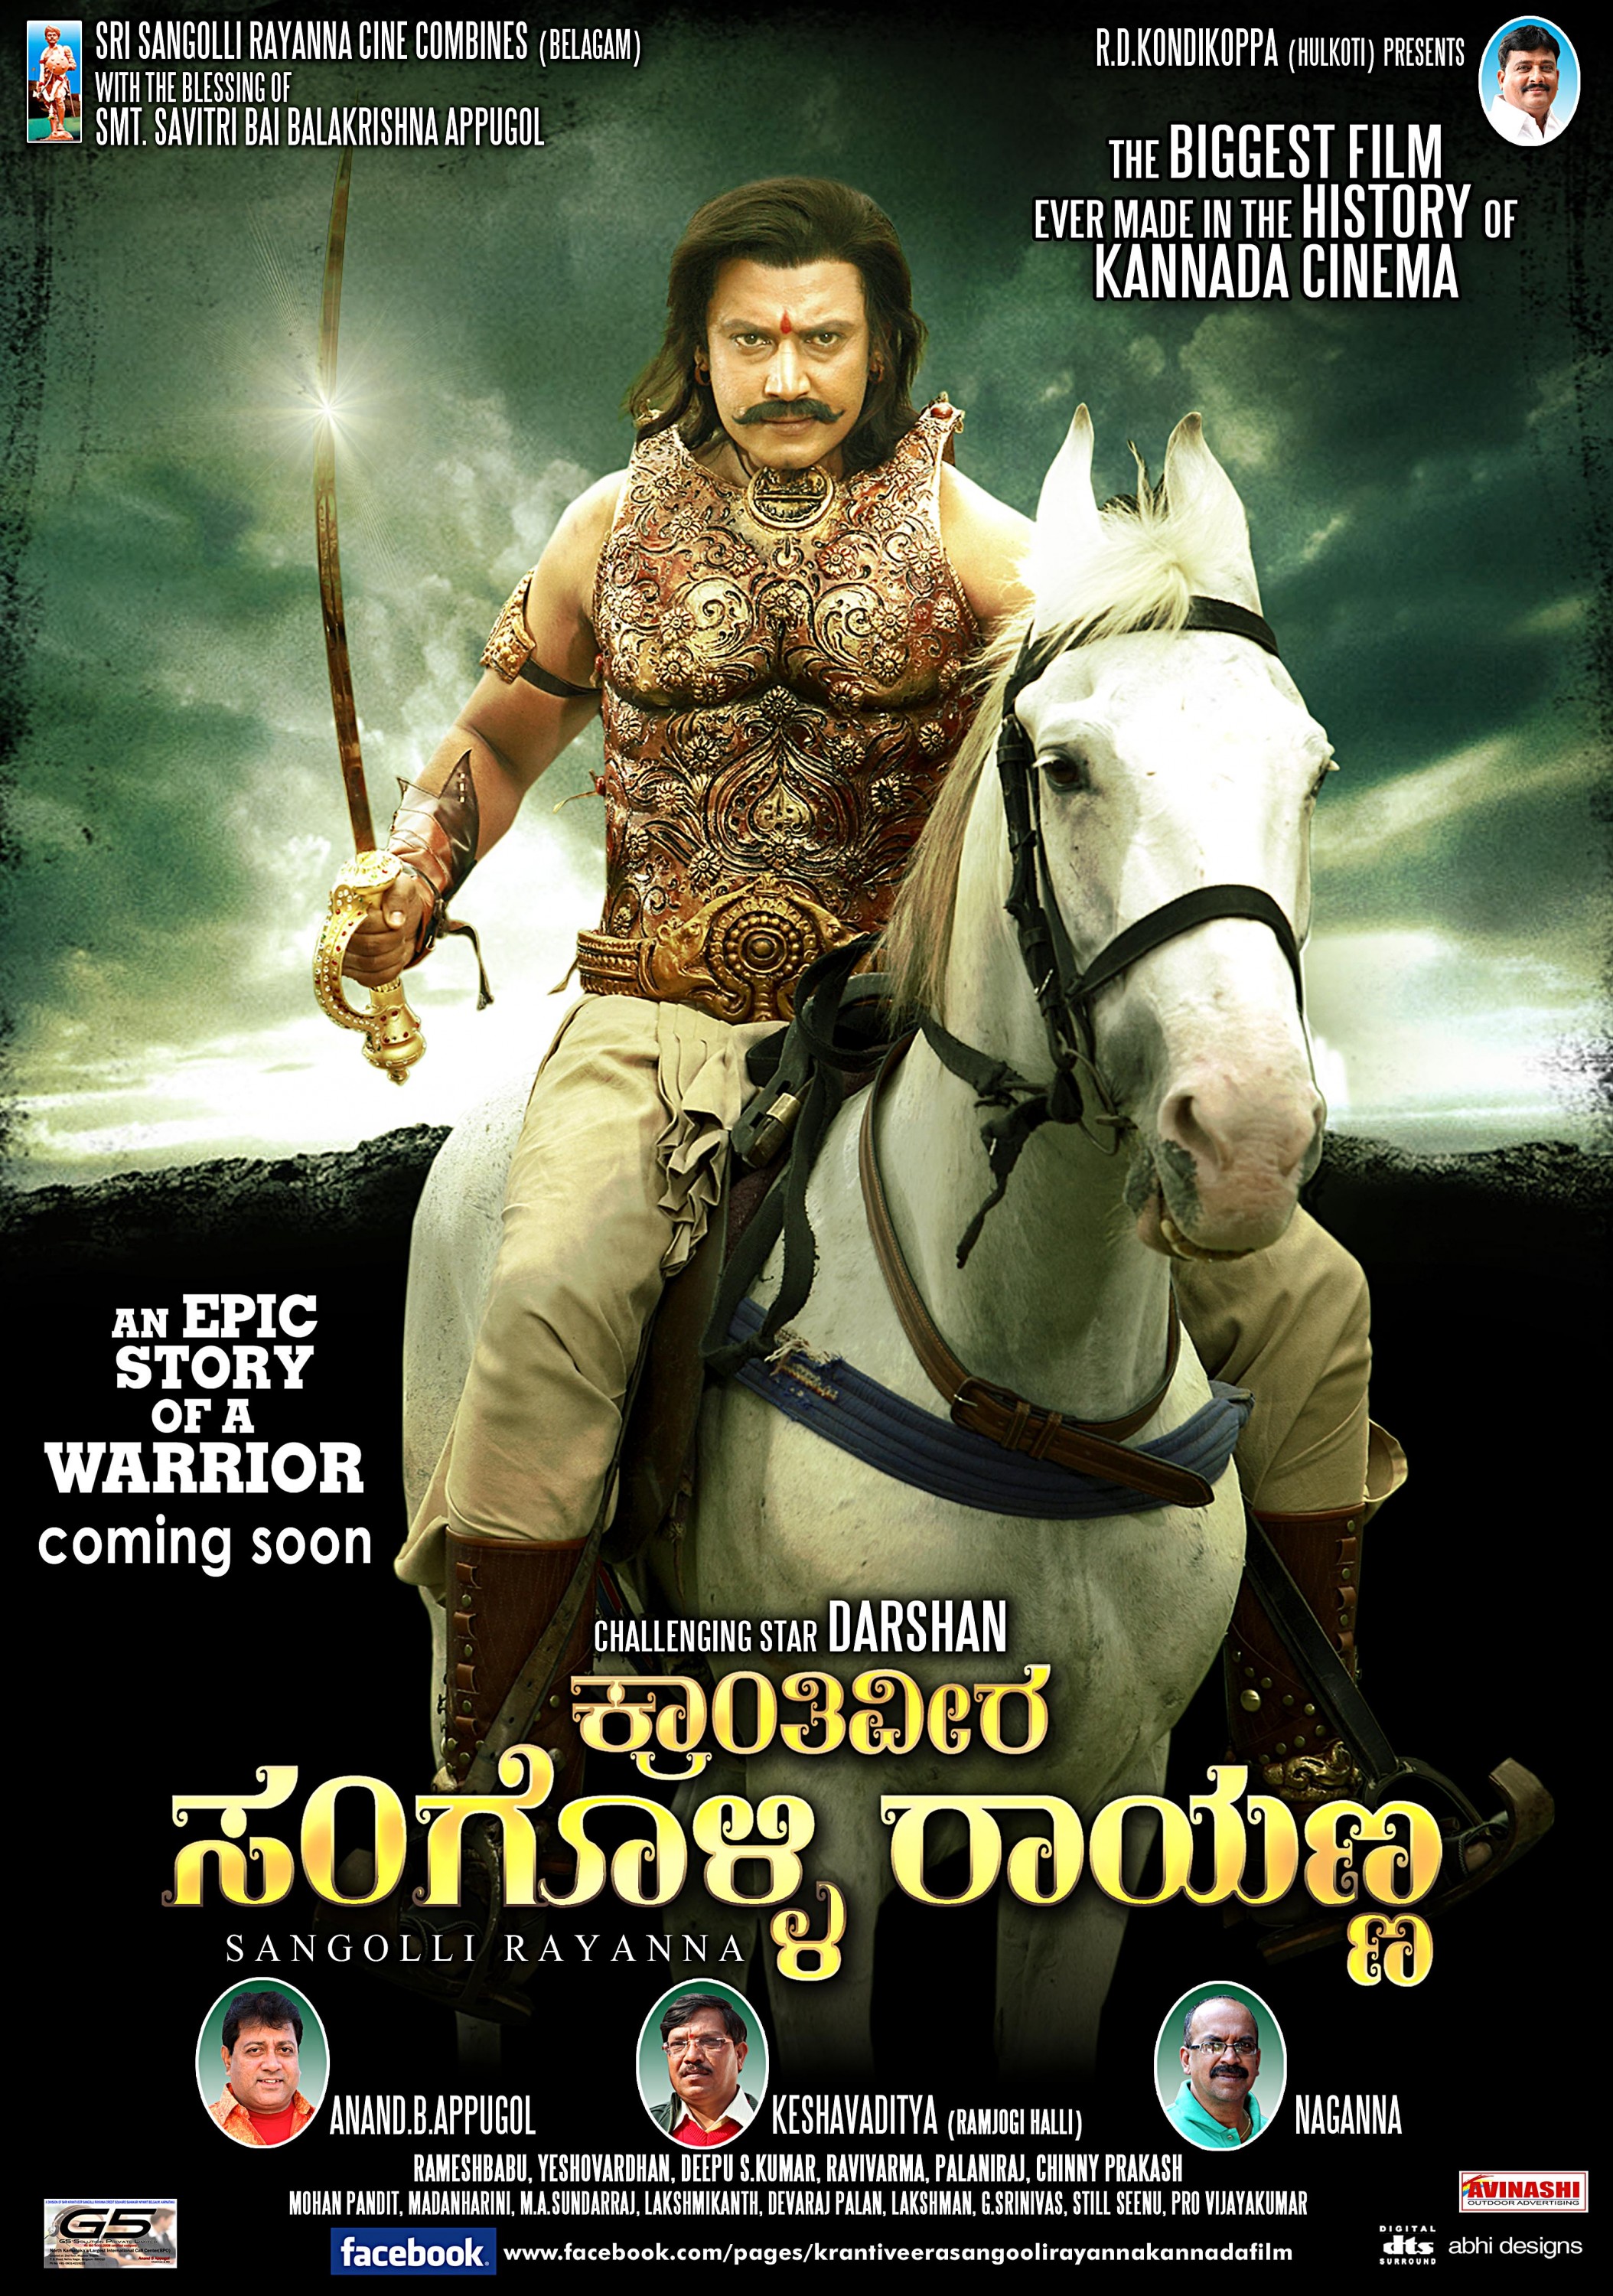 Mega Sized Movie Poster Image for Sangolli Rayanna (#29 of 79)